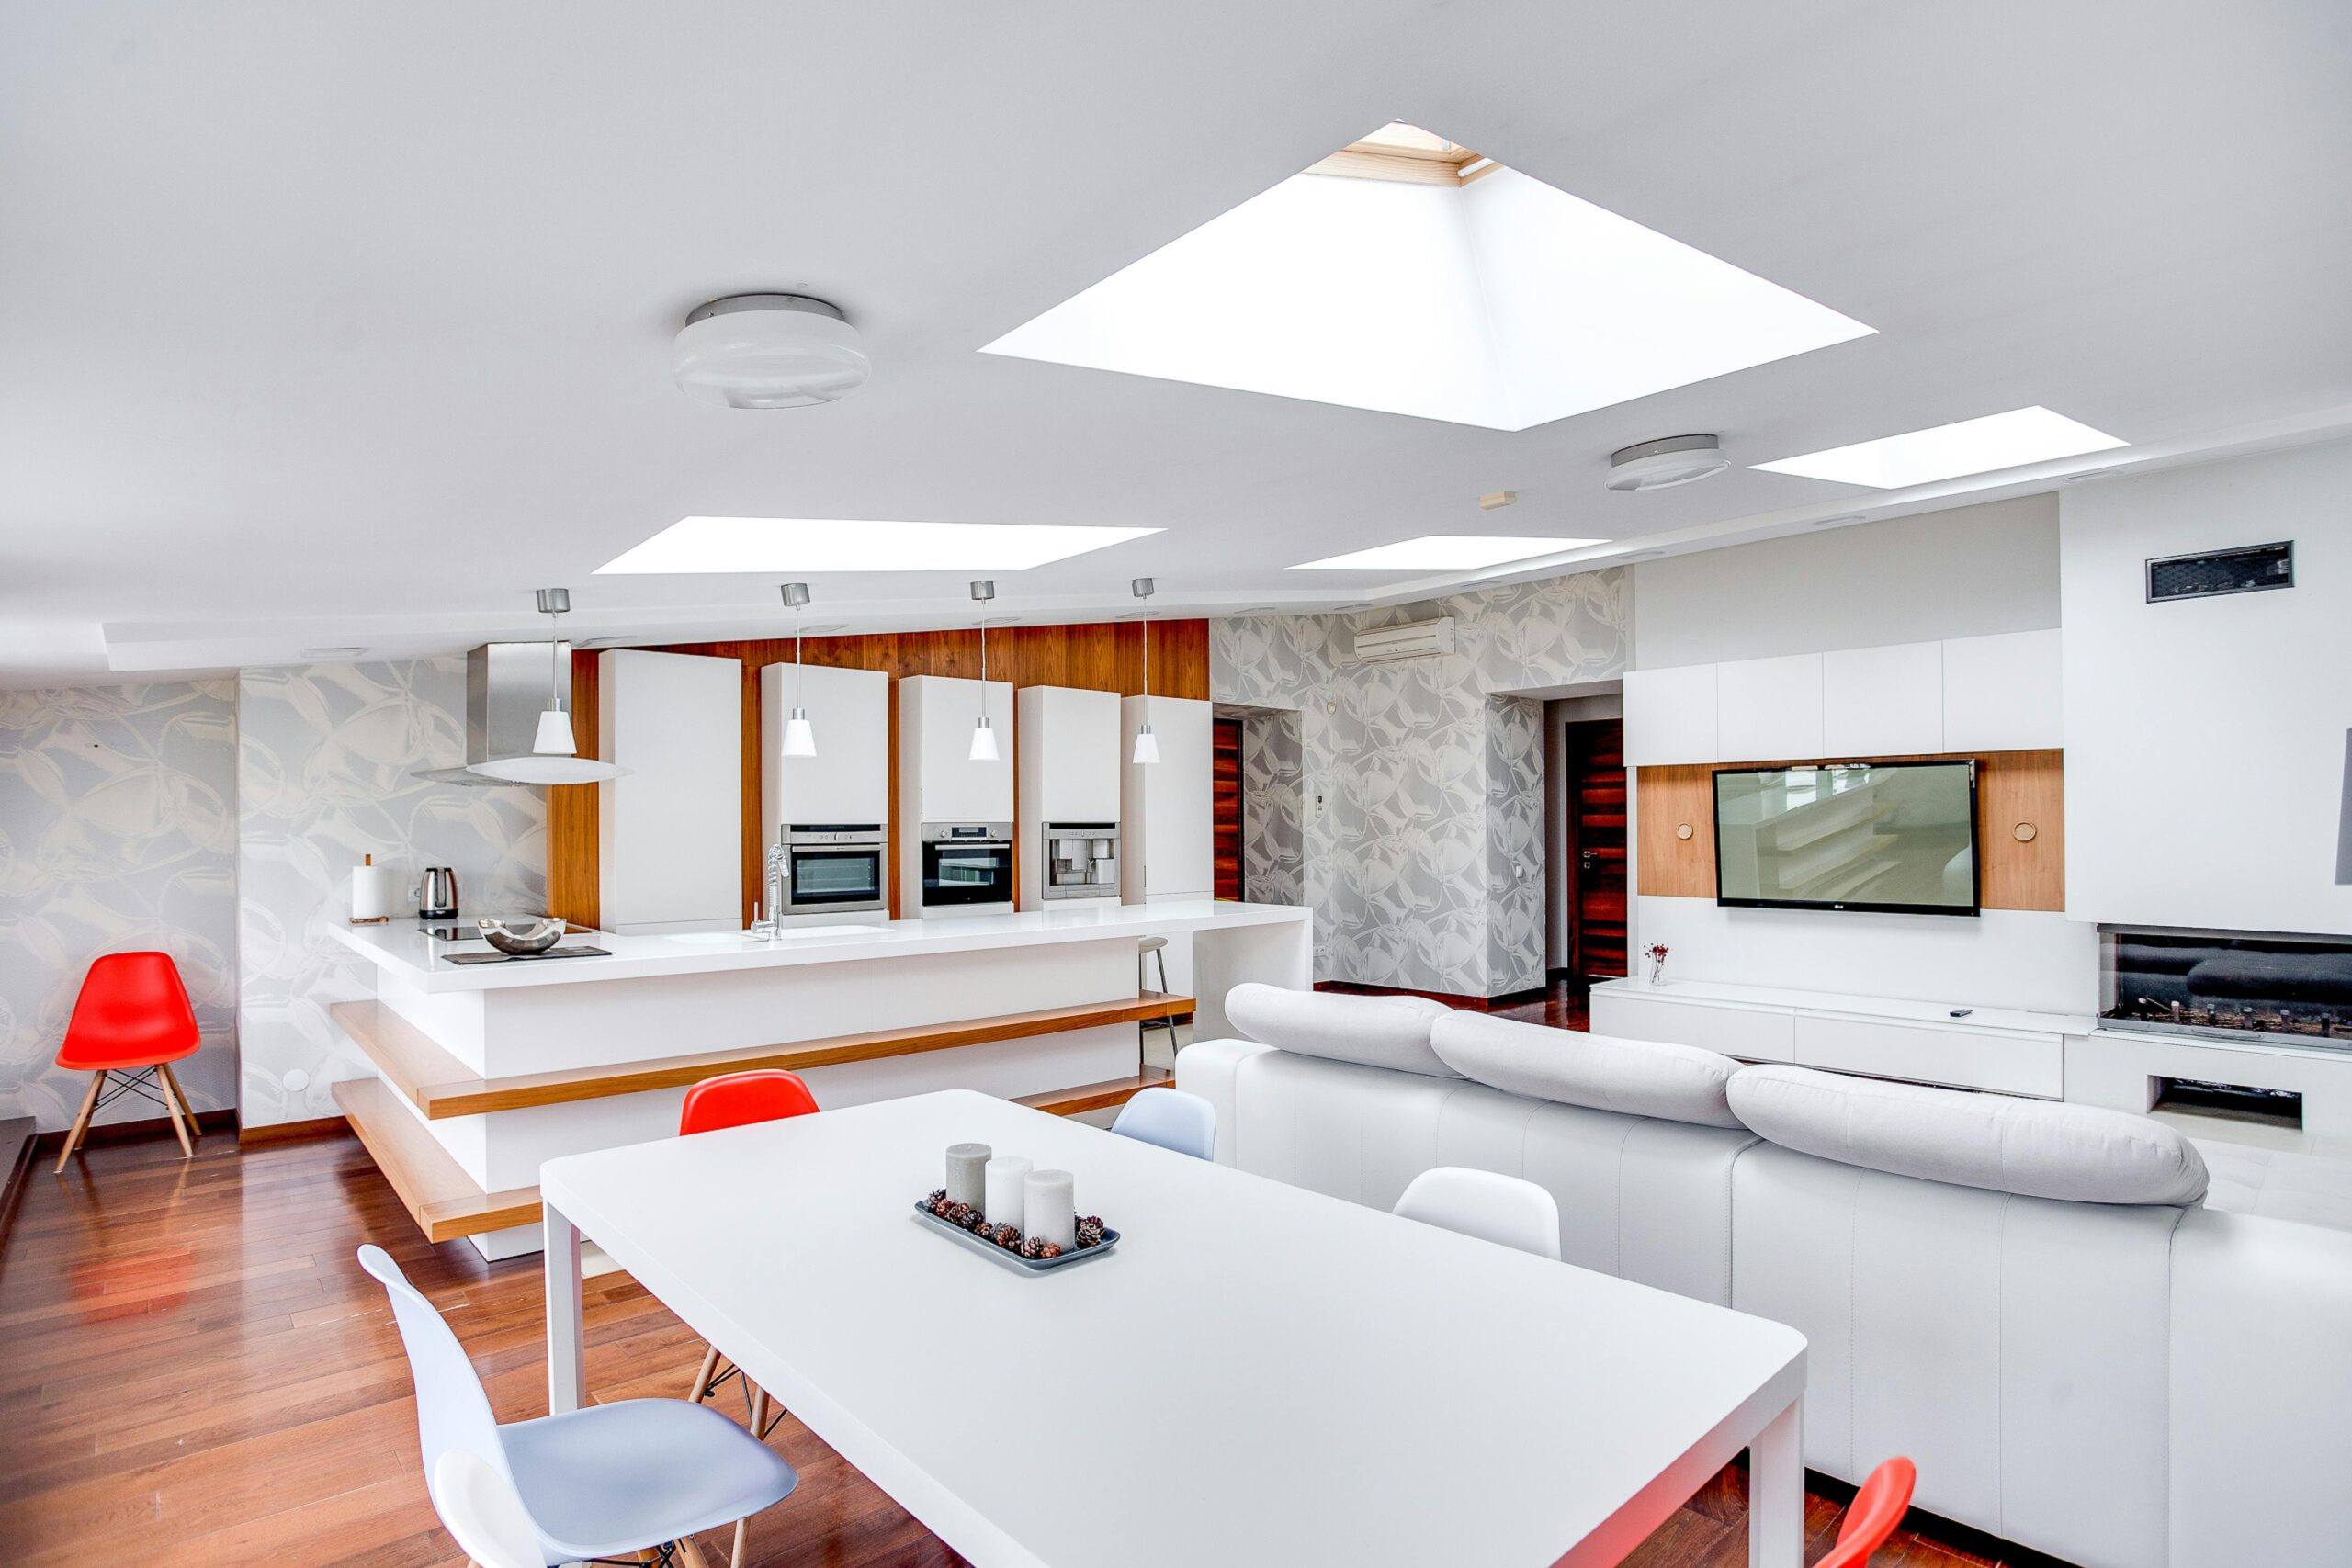 Inside of an apartment building. Kitchen is white with a white table and red & white chairs.